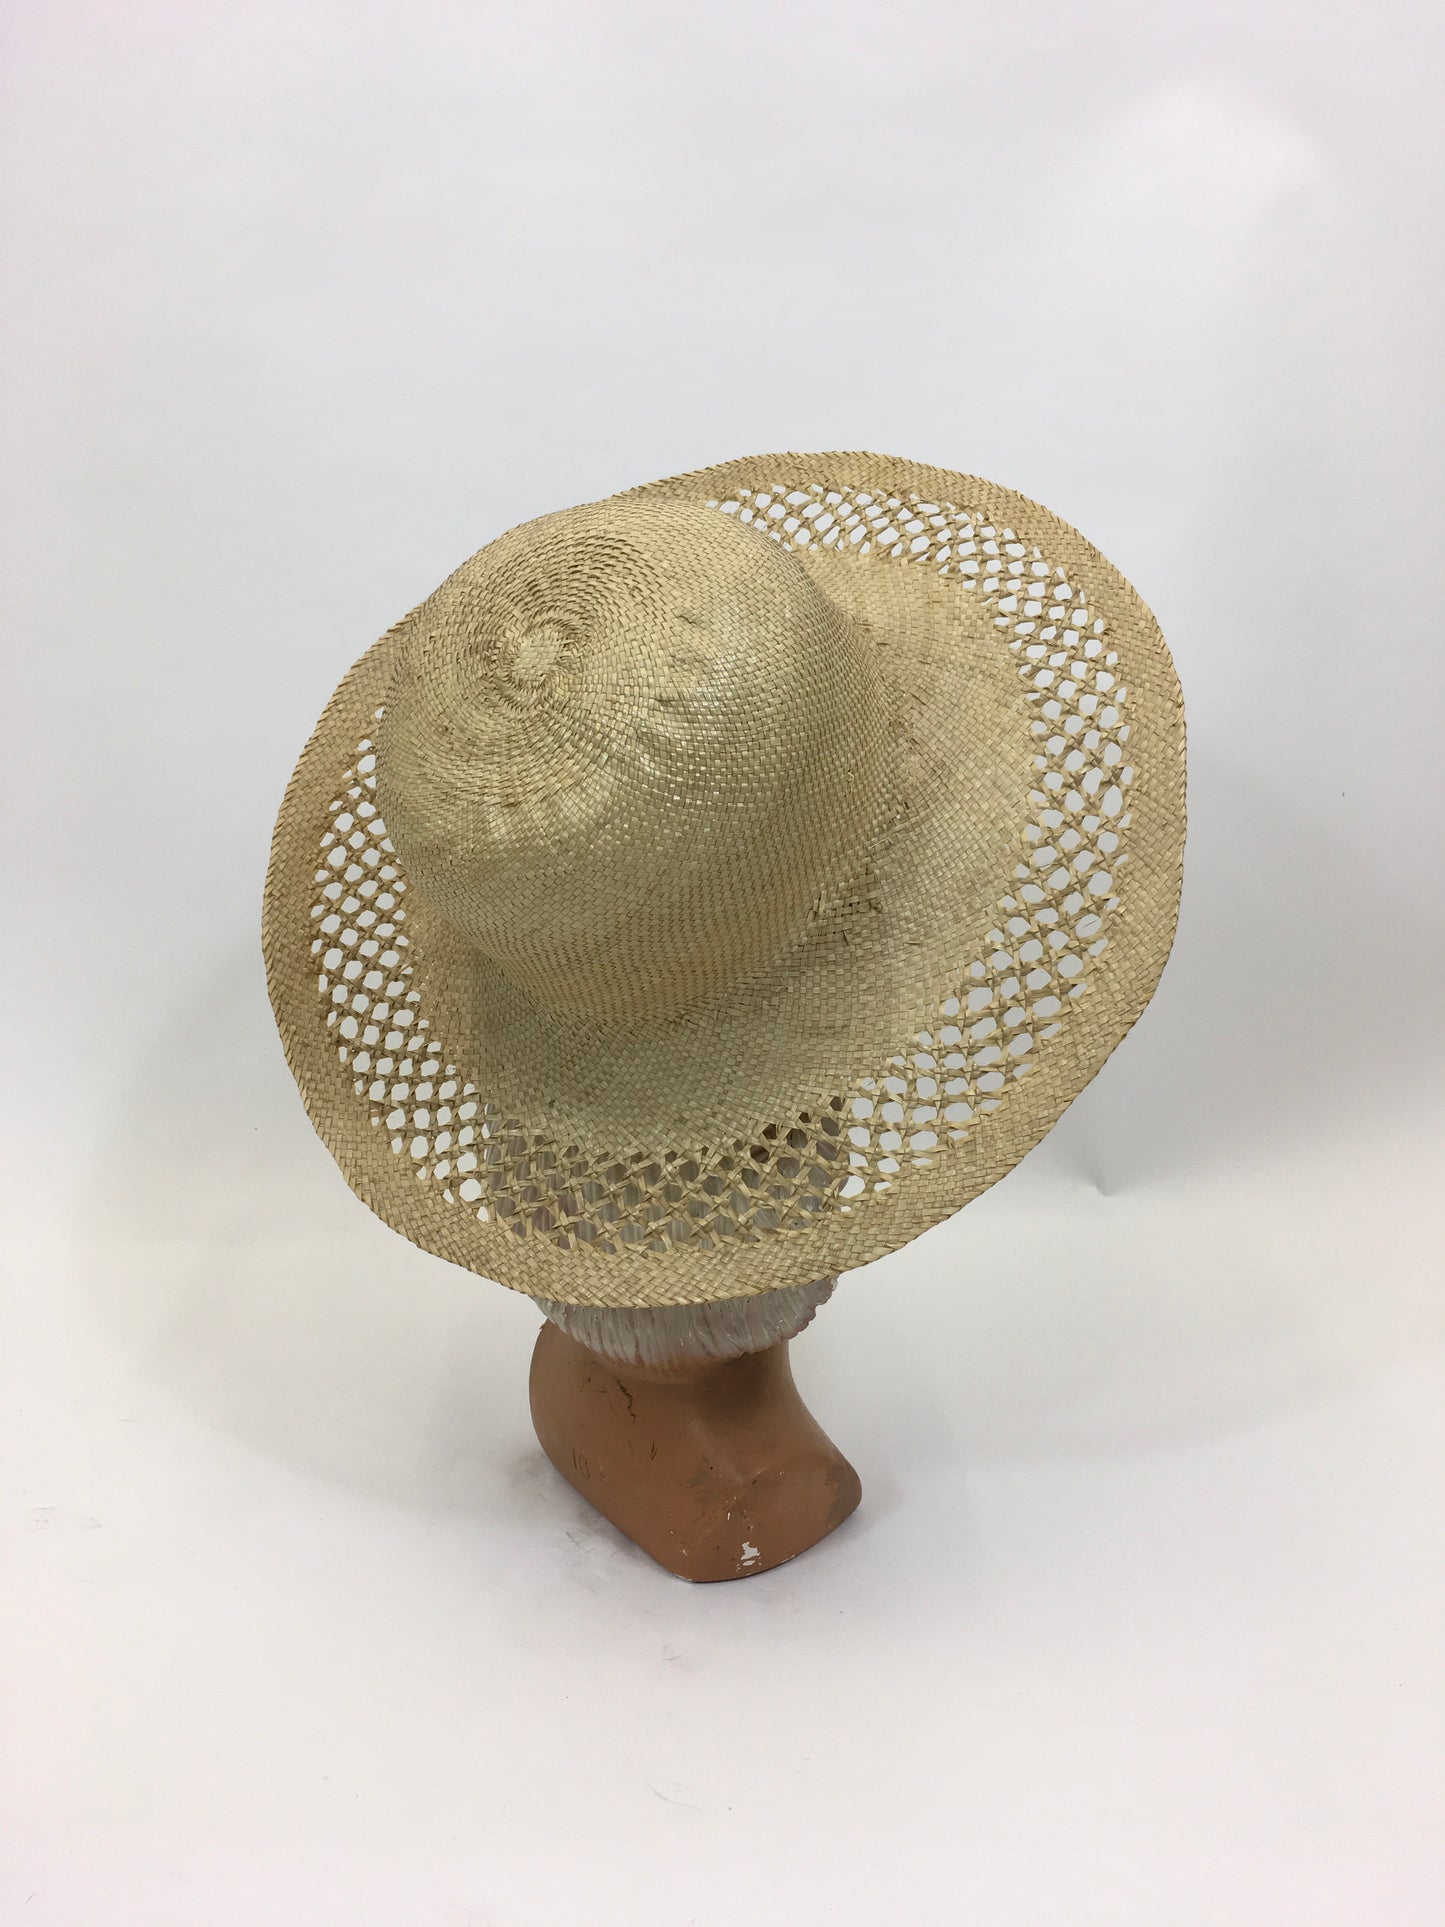 Original 1930’s Lovely Natural Straw Hat with Fretwork